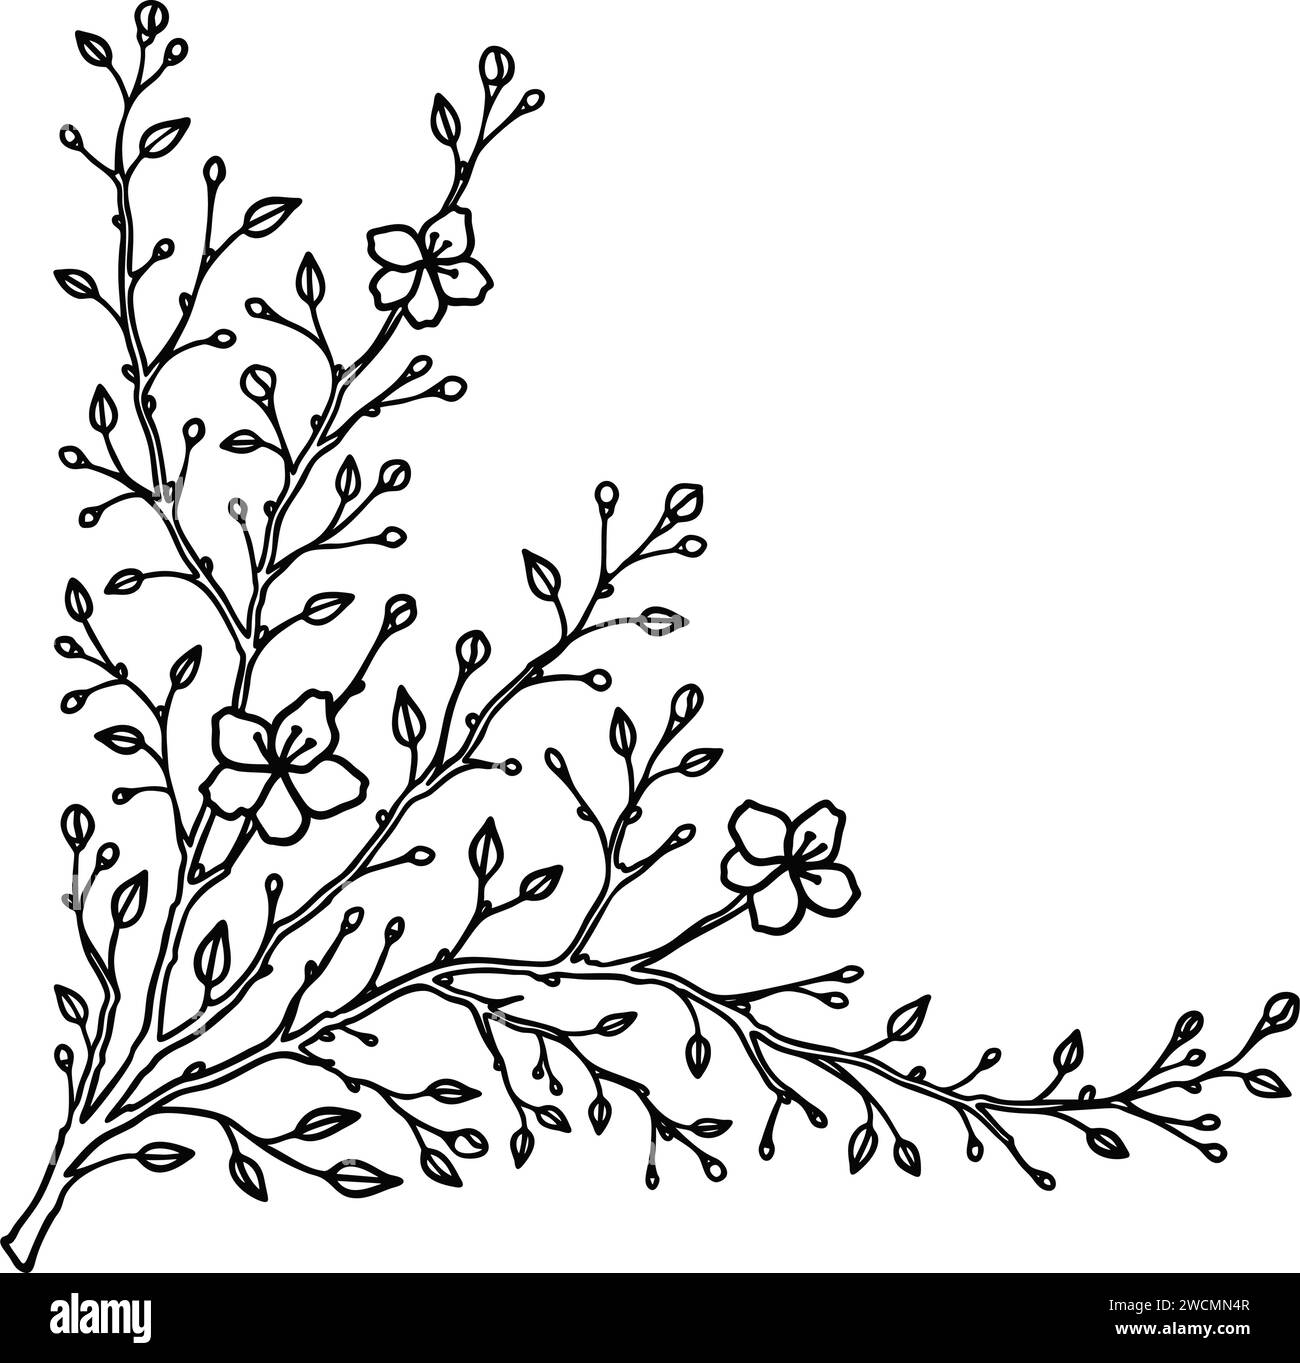 Hand drawn linear flowering spring branch. Minimal floral logo design element. Plant simple drawing for wedding invitation, tattoo, vintage designs, s Stock Vector